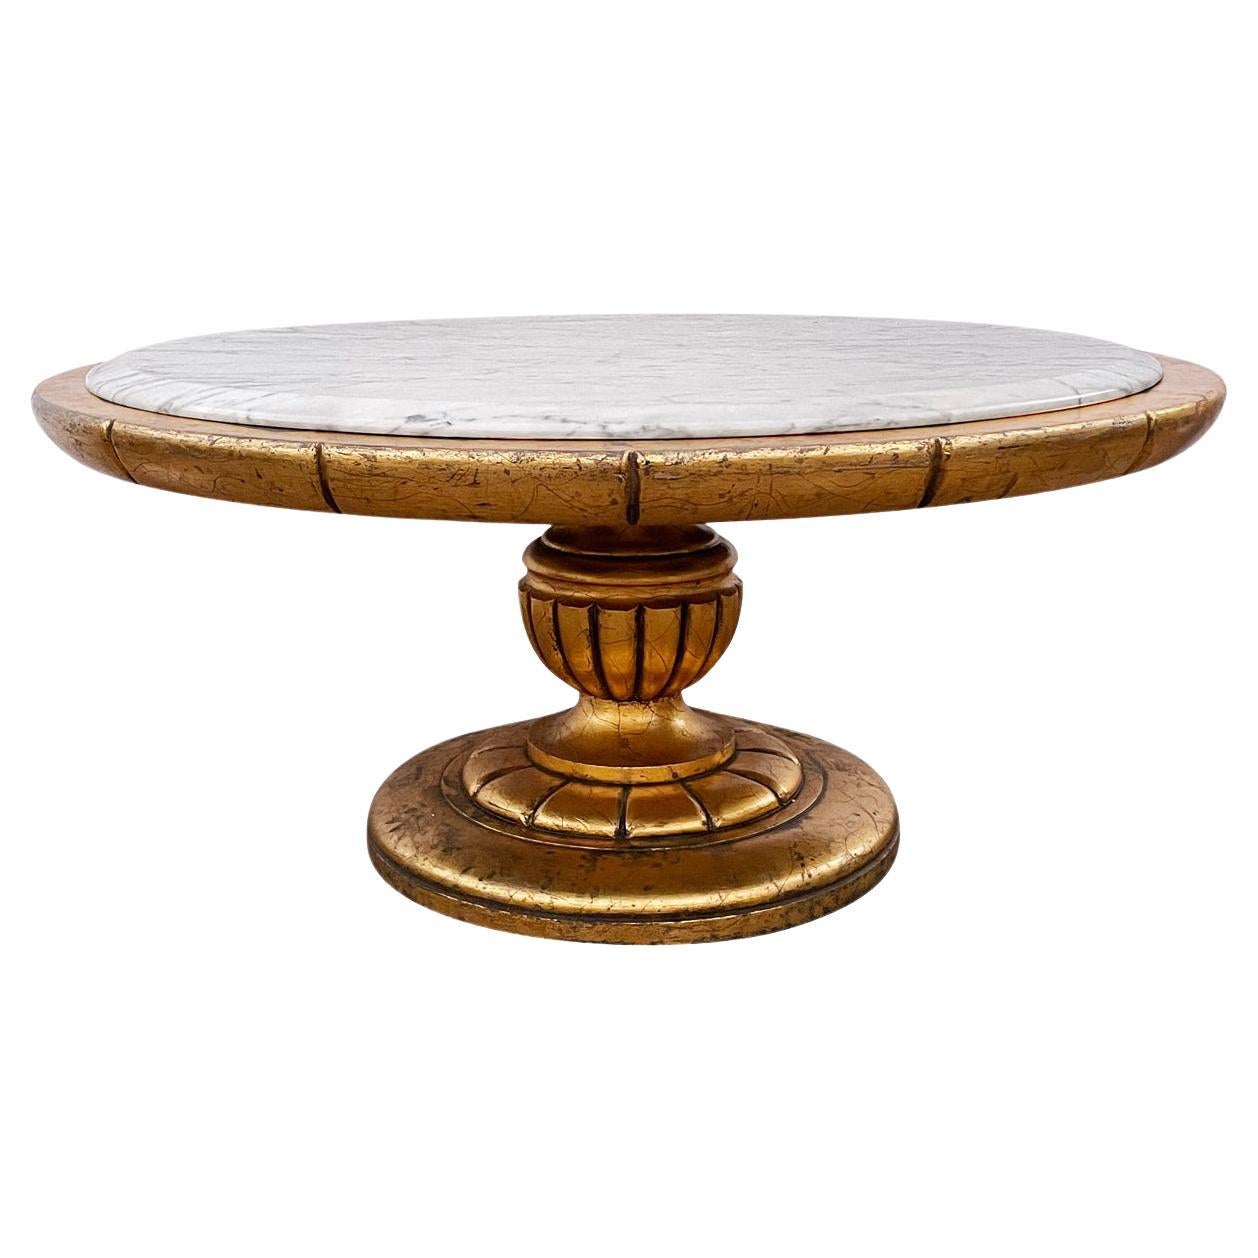 Hollywood Regency Round Cocktail Table in Gold & Marble in Style of James Mont 